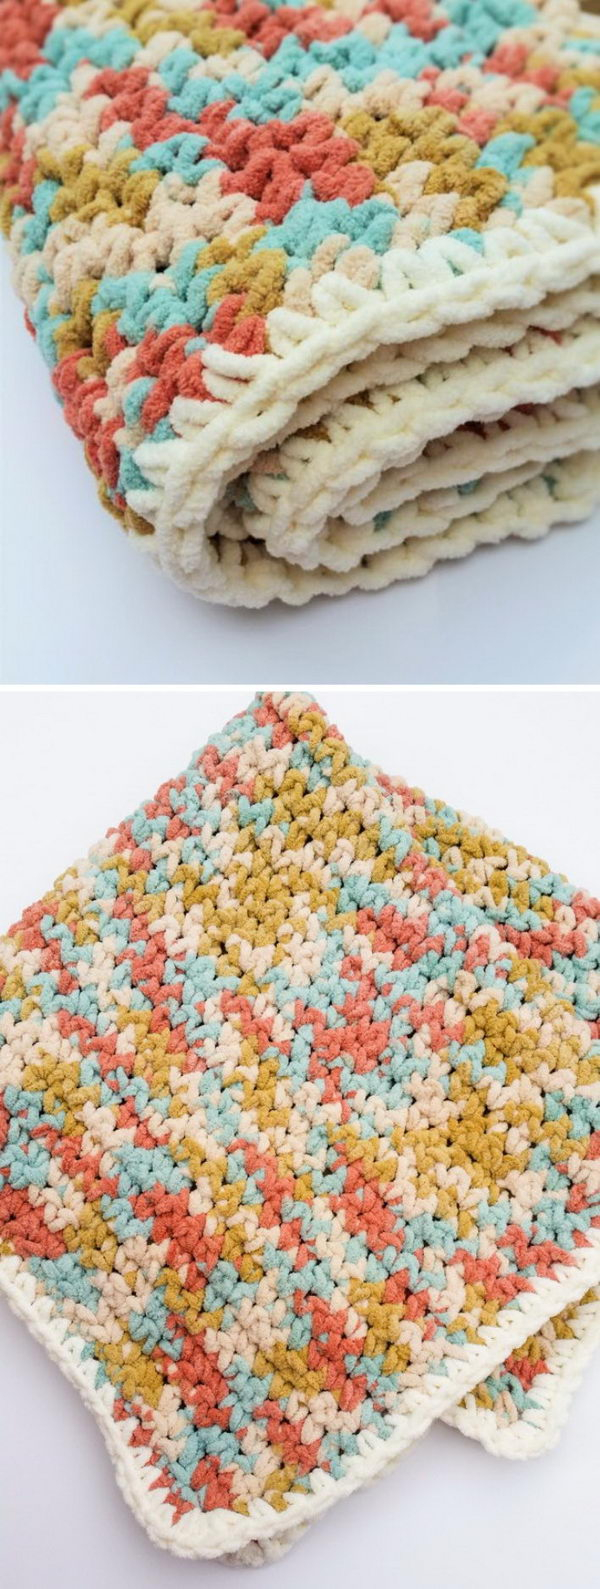 Baby Afghan Crochet Patterns 30 Free Crochet Patterns For Blankets Hative